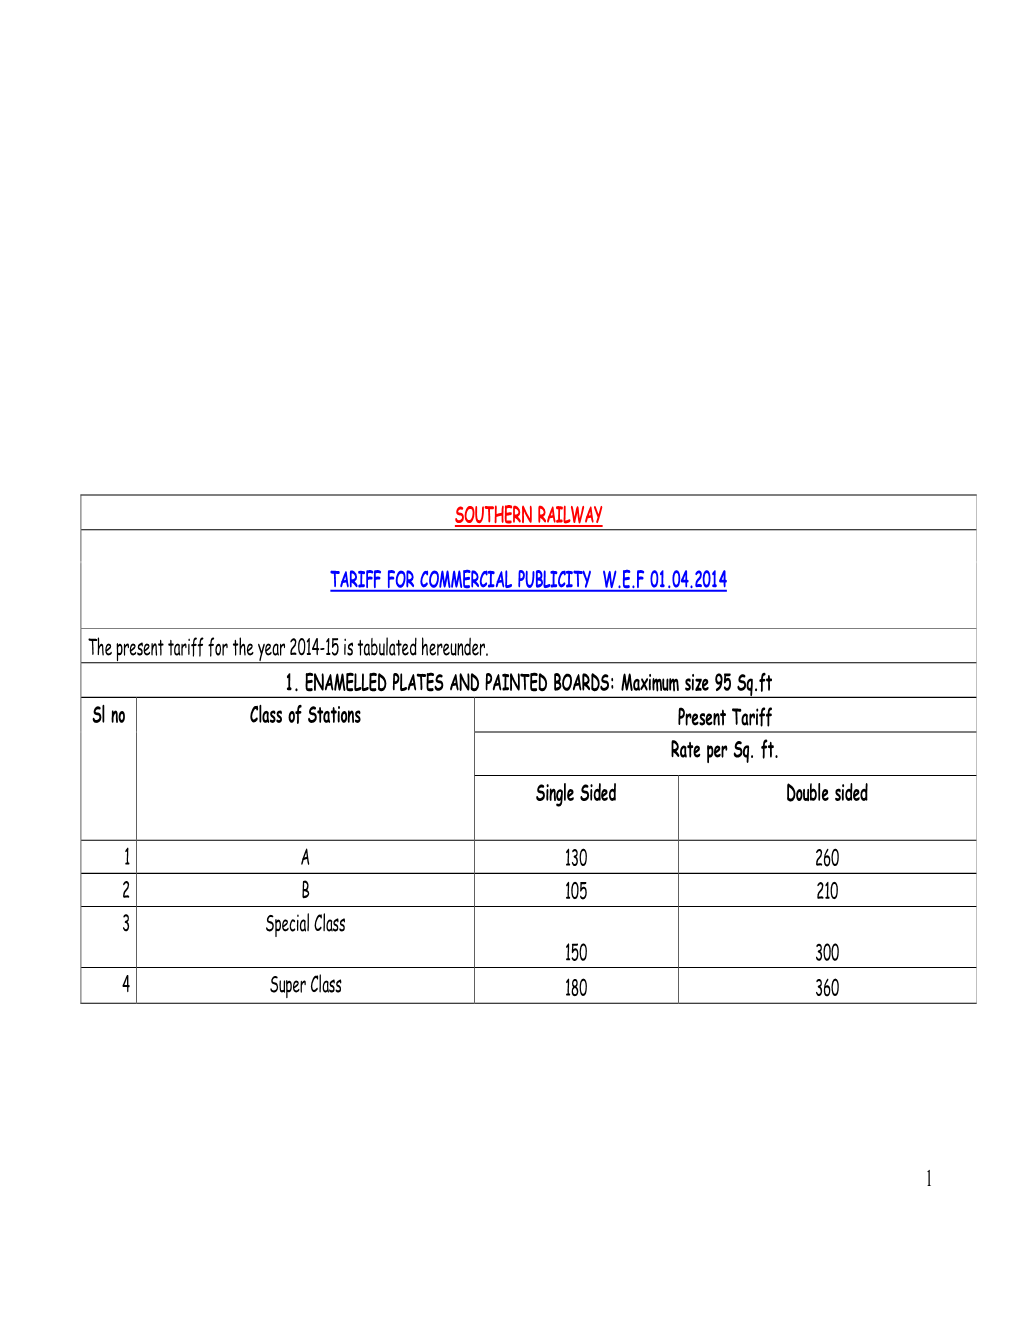 SOUTHERN RAILWAY TARIFF for COMMERCIAL PUBLICITY W.E.F 01.04.2014 the Present Tariff for the Year 2014-15 Is Tabulated Hereunde